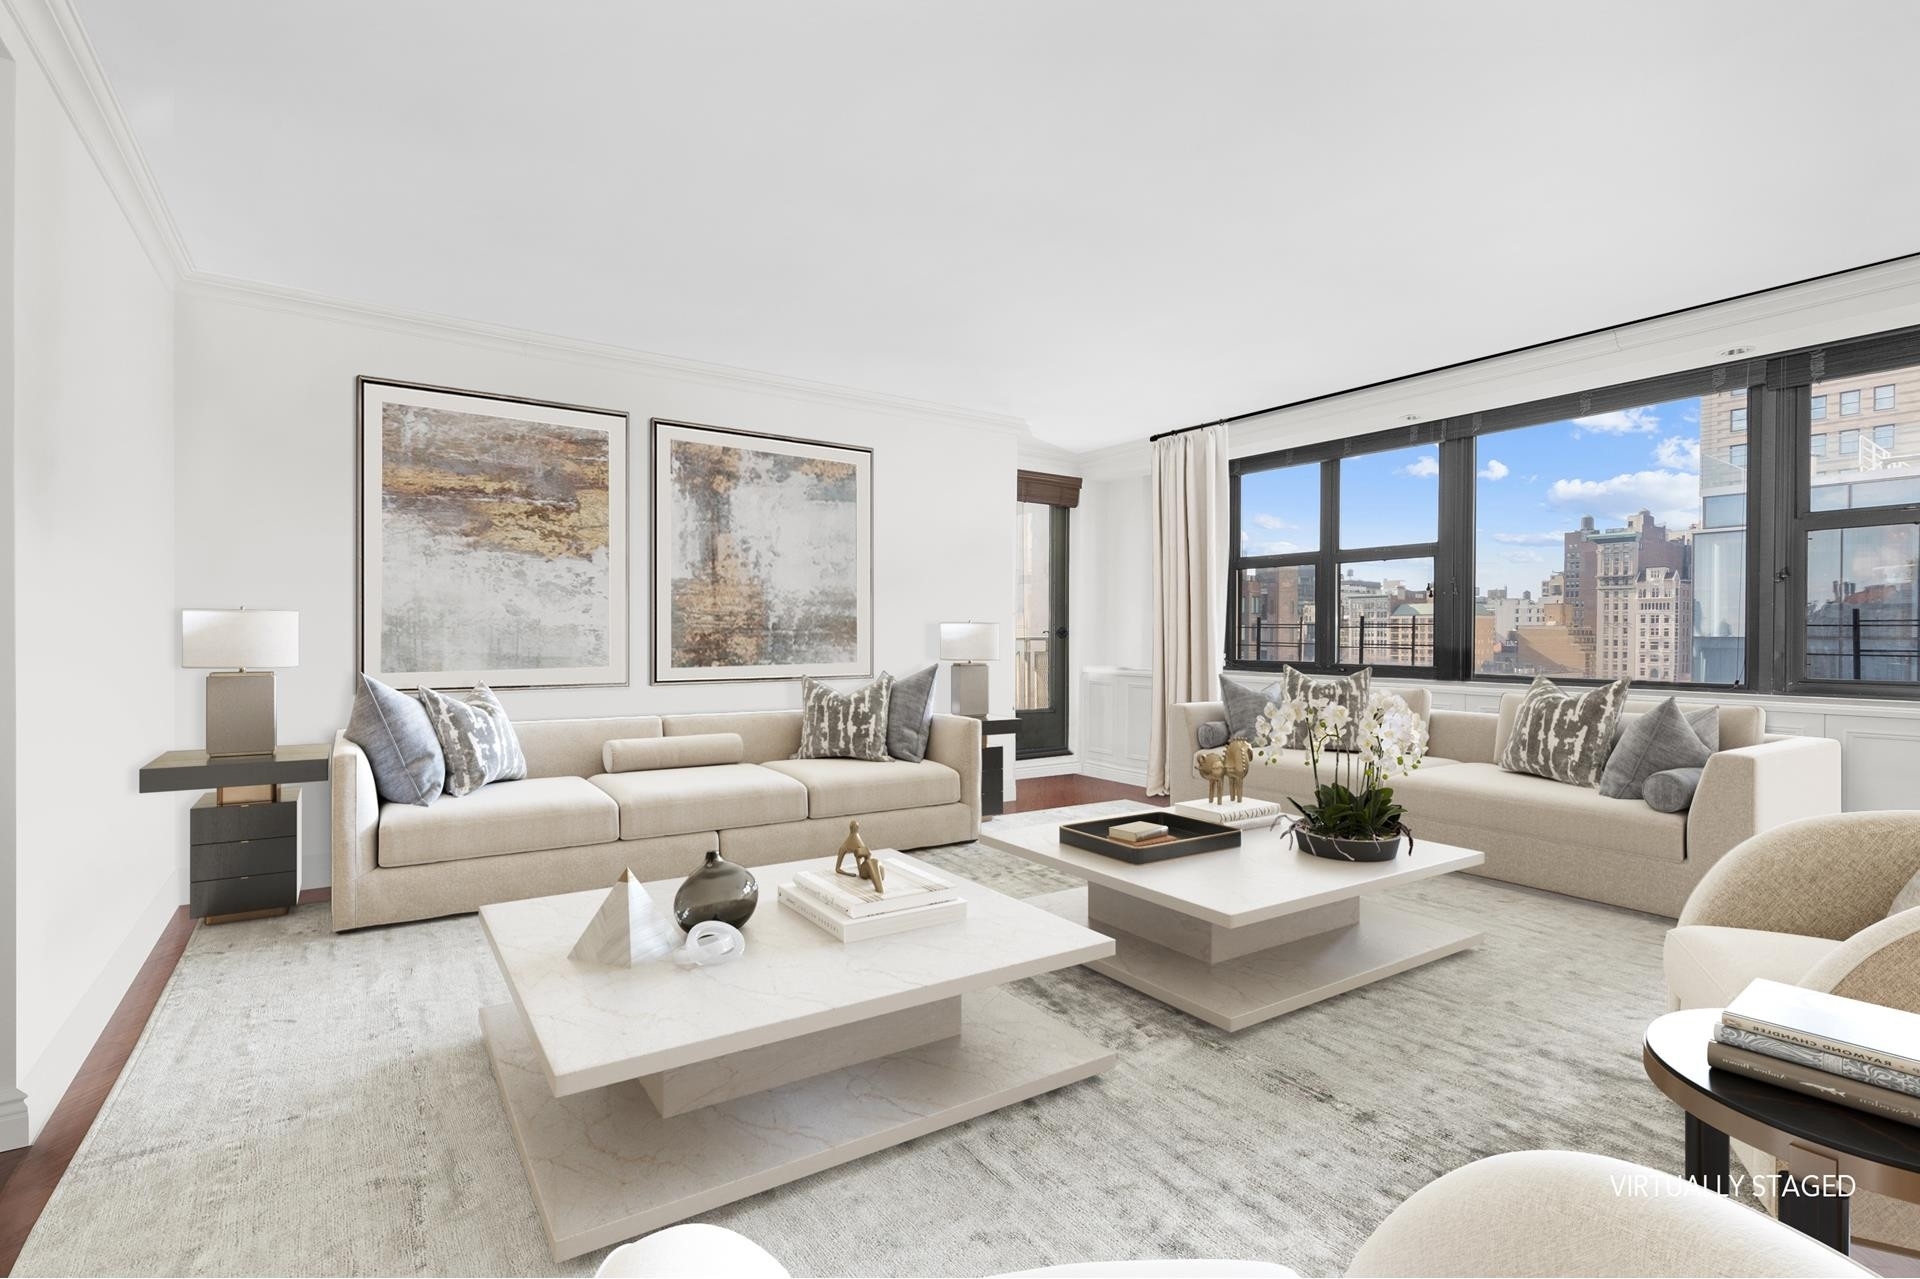 Co-op Properties for Sale at Gramercy Plaza, 130 E 18TH ST , 14RSTU Gramercy Park, New York, New York 10003